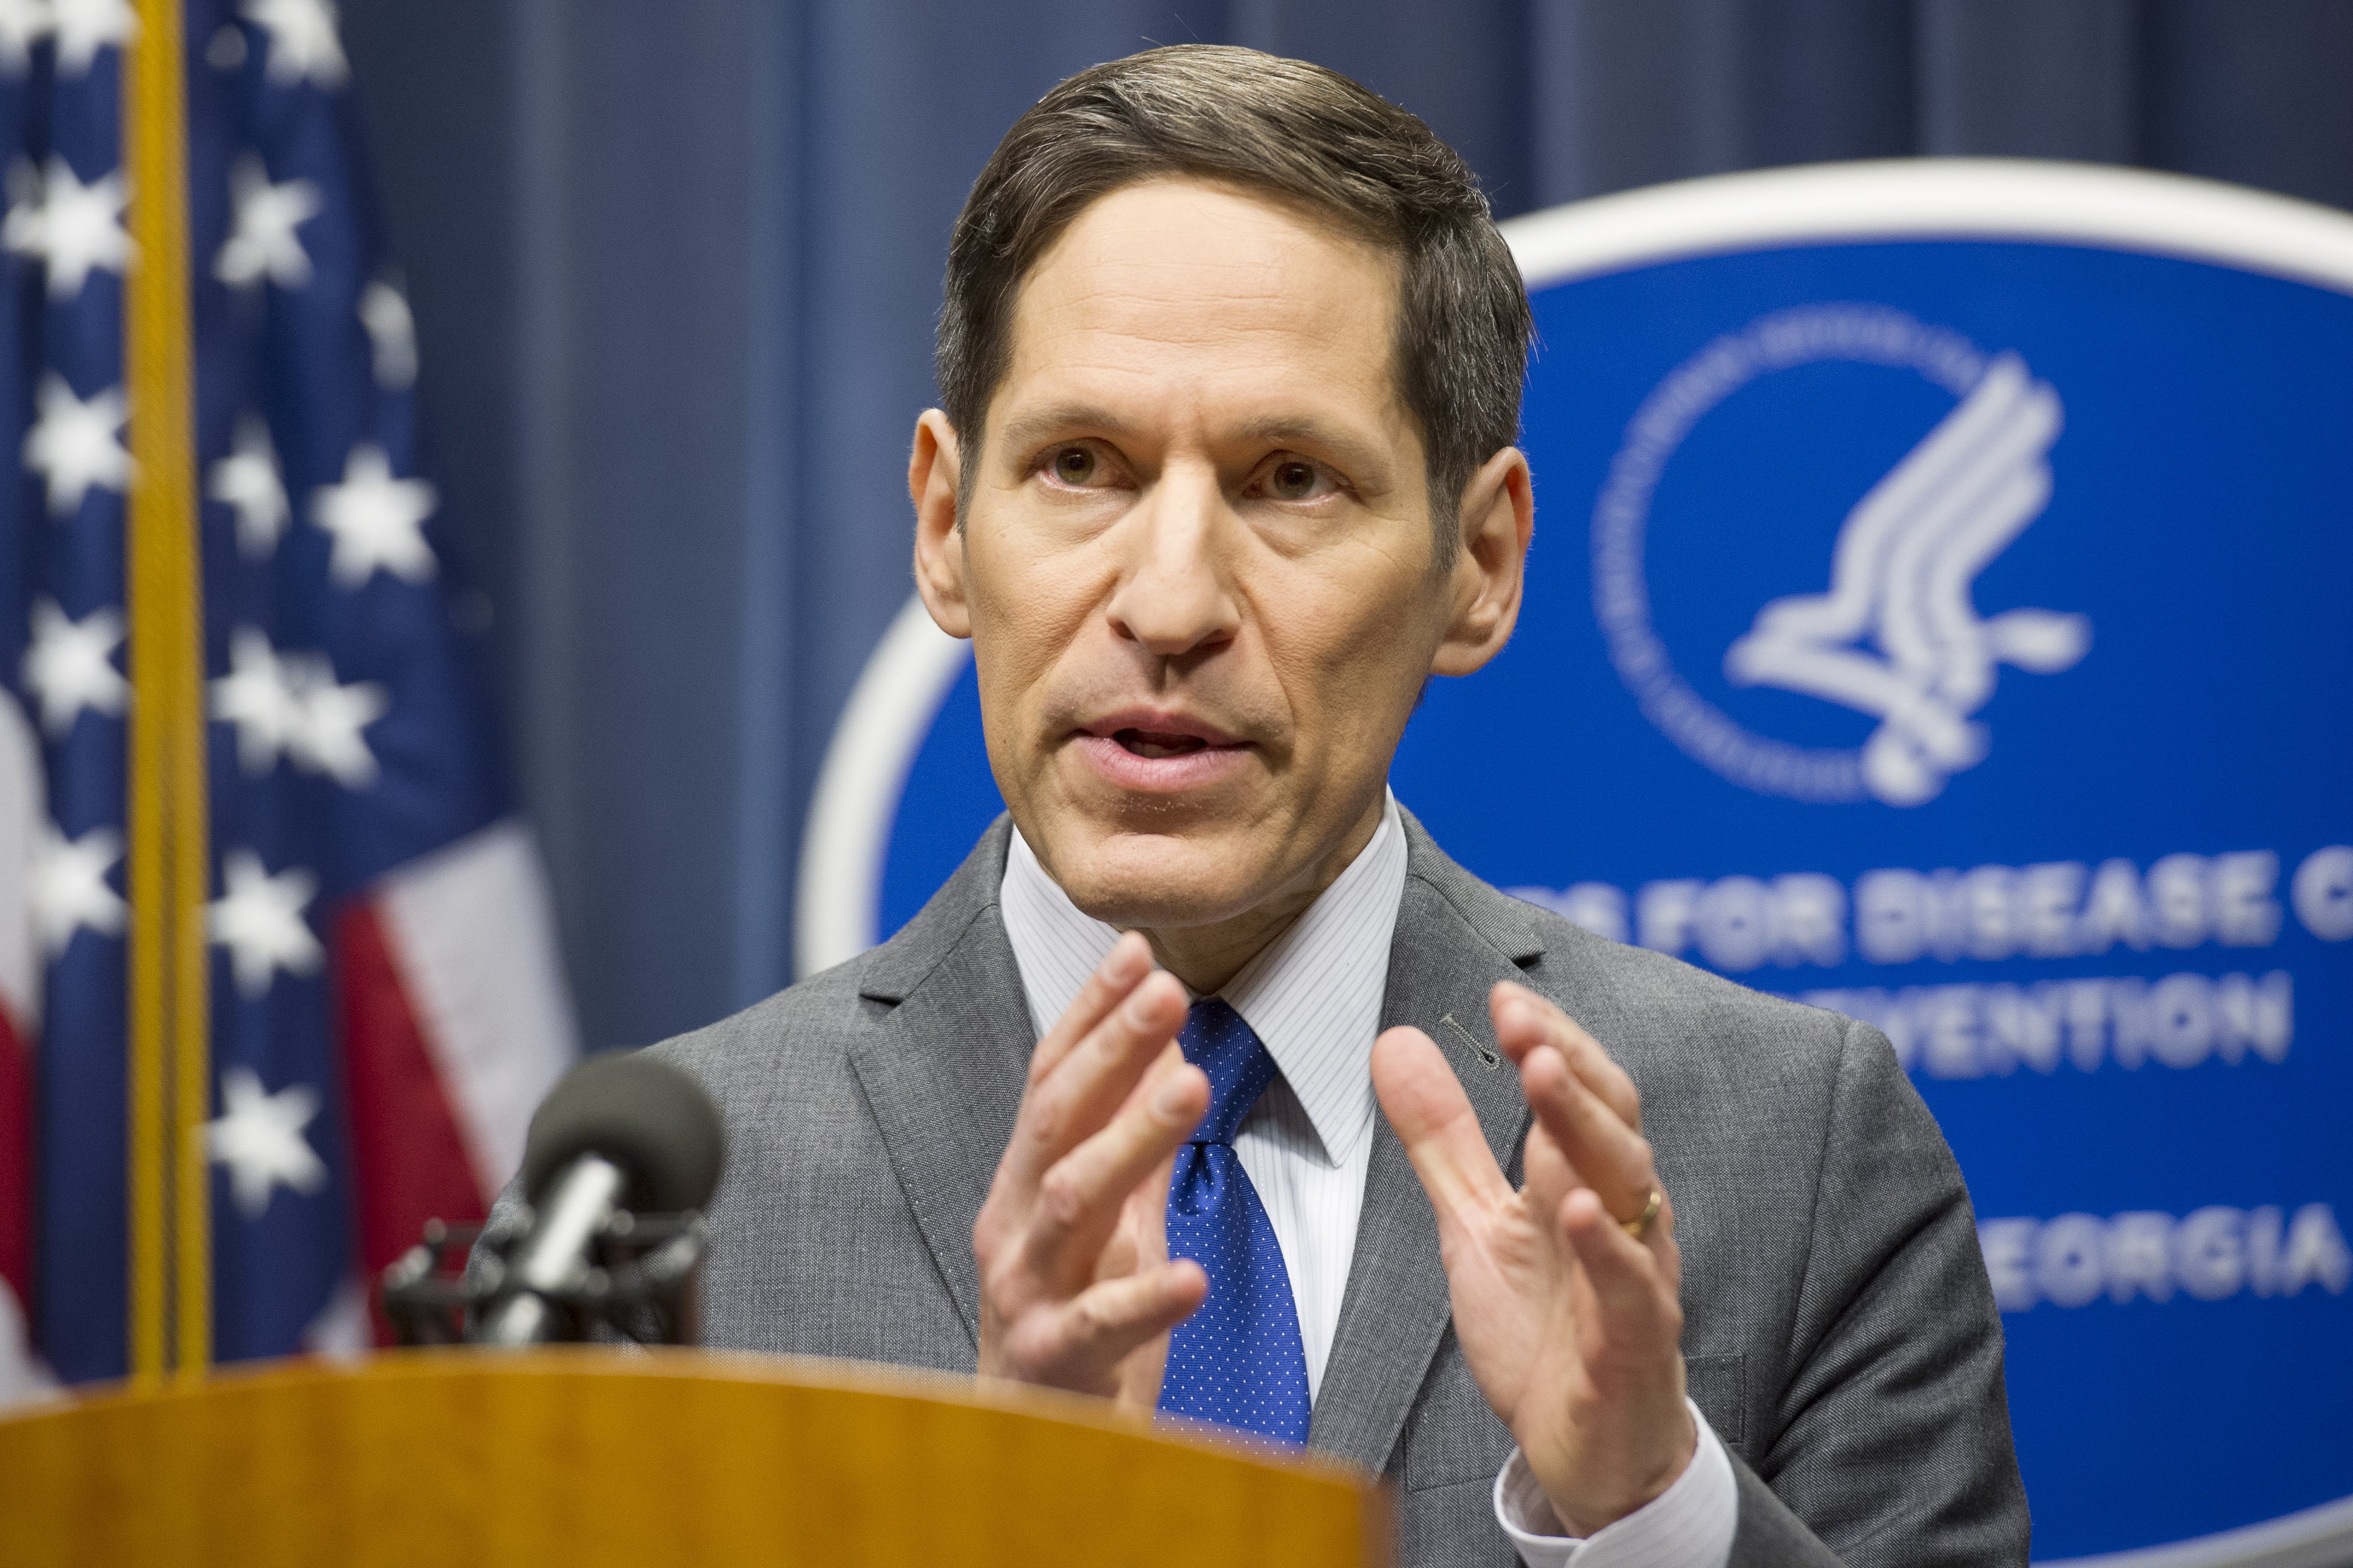 Dr. Tom Frieden the head of the Centers for Disease Control and Prevention speaks at a news conference on Oct. 12, 2014, in Atlanta. (John Amis—AP)